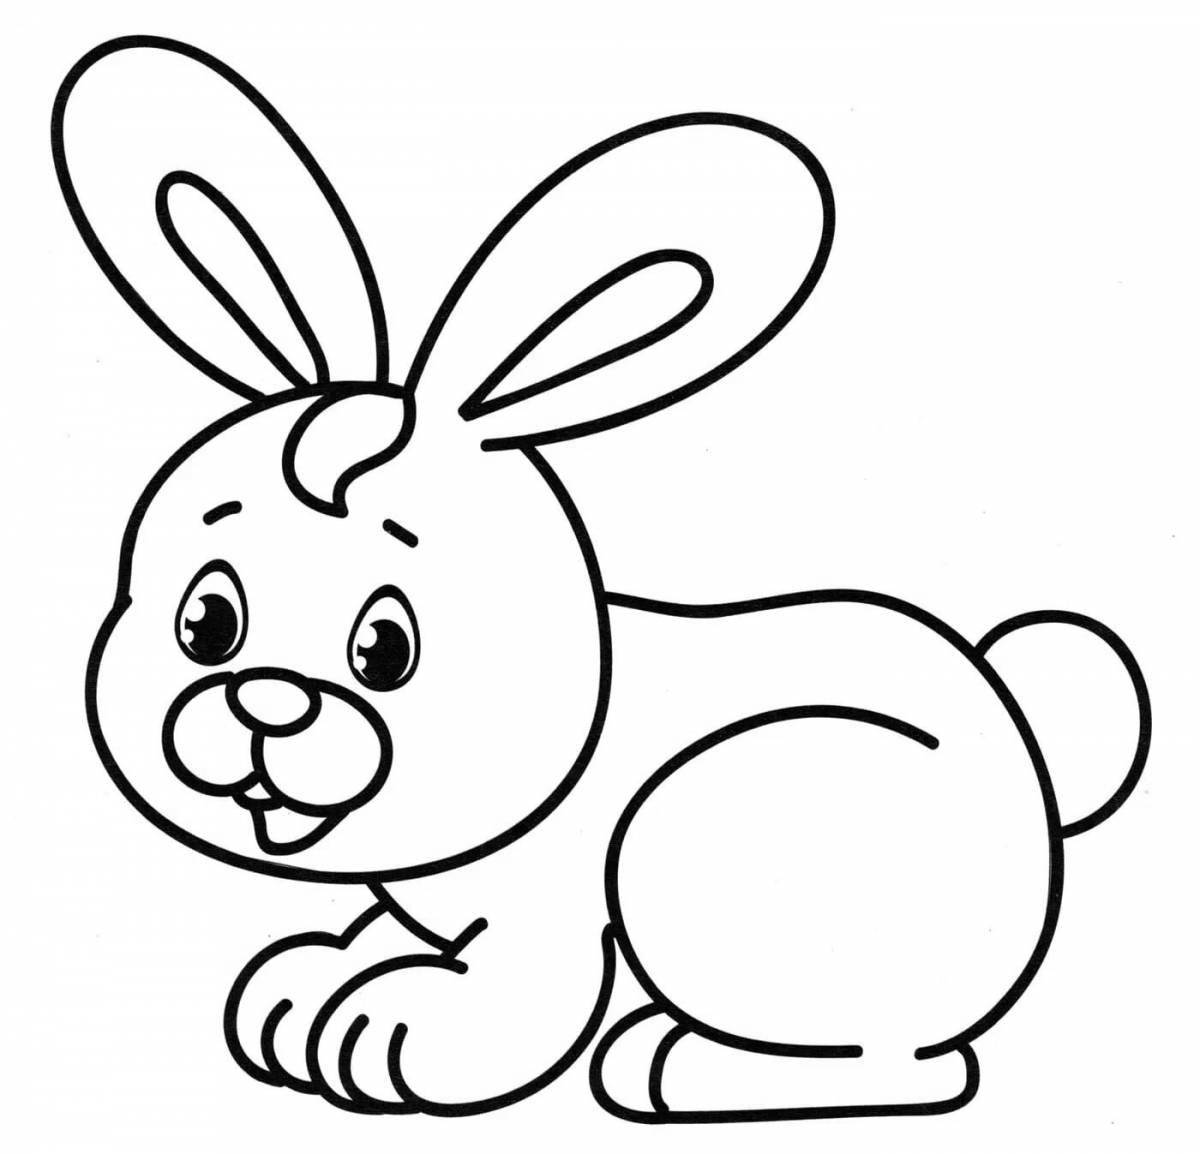 Bunny for children 2 3 years old #1